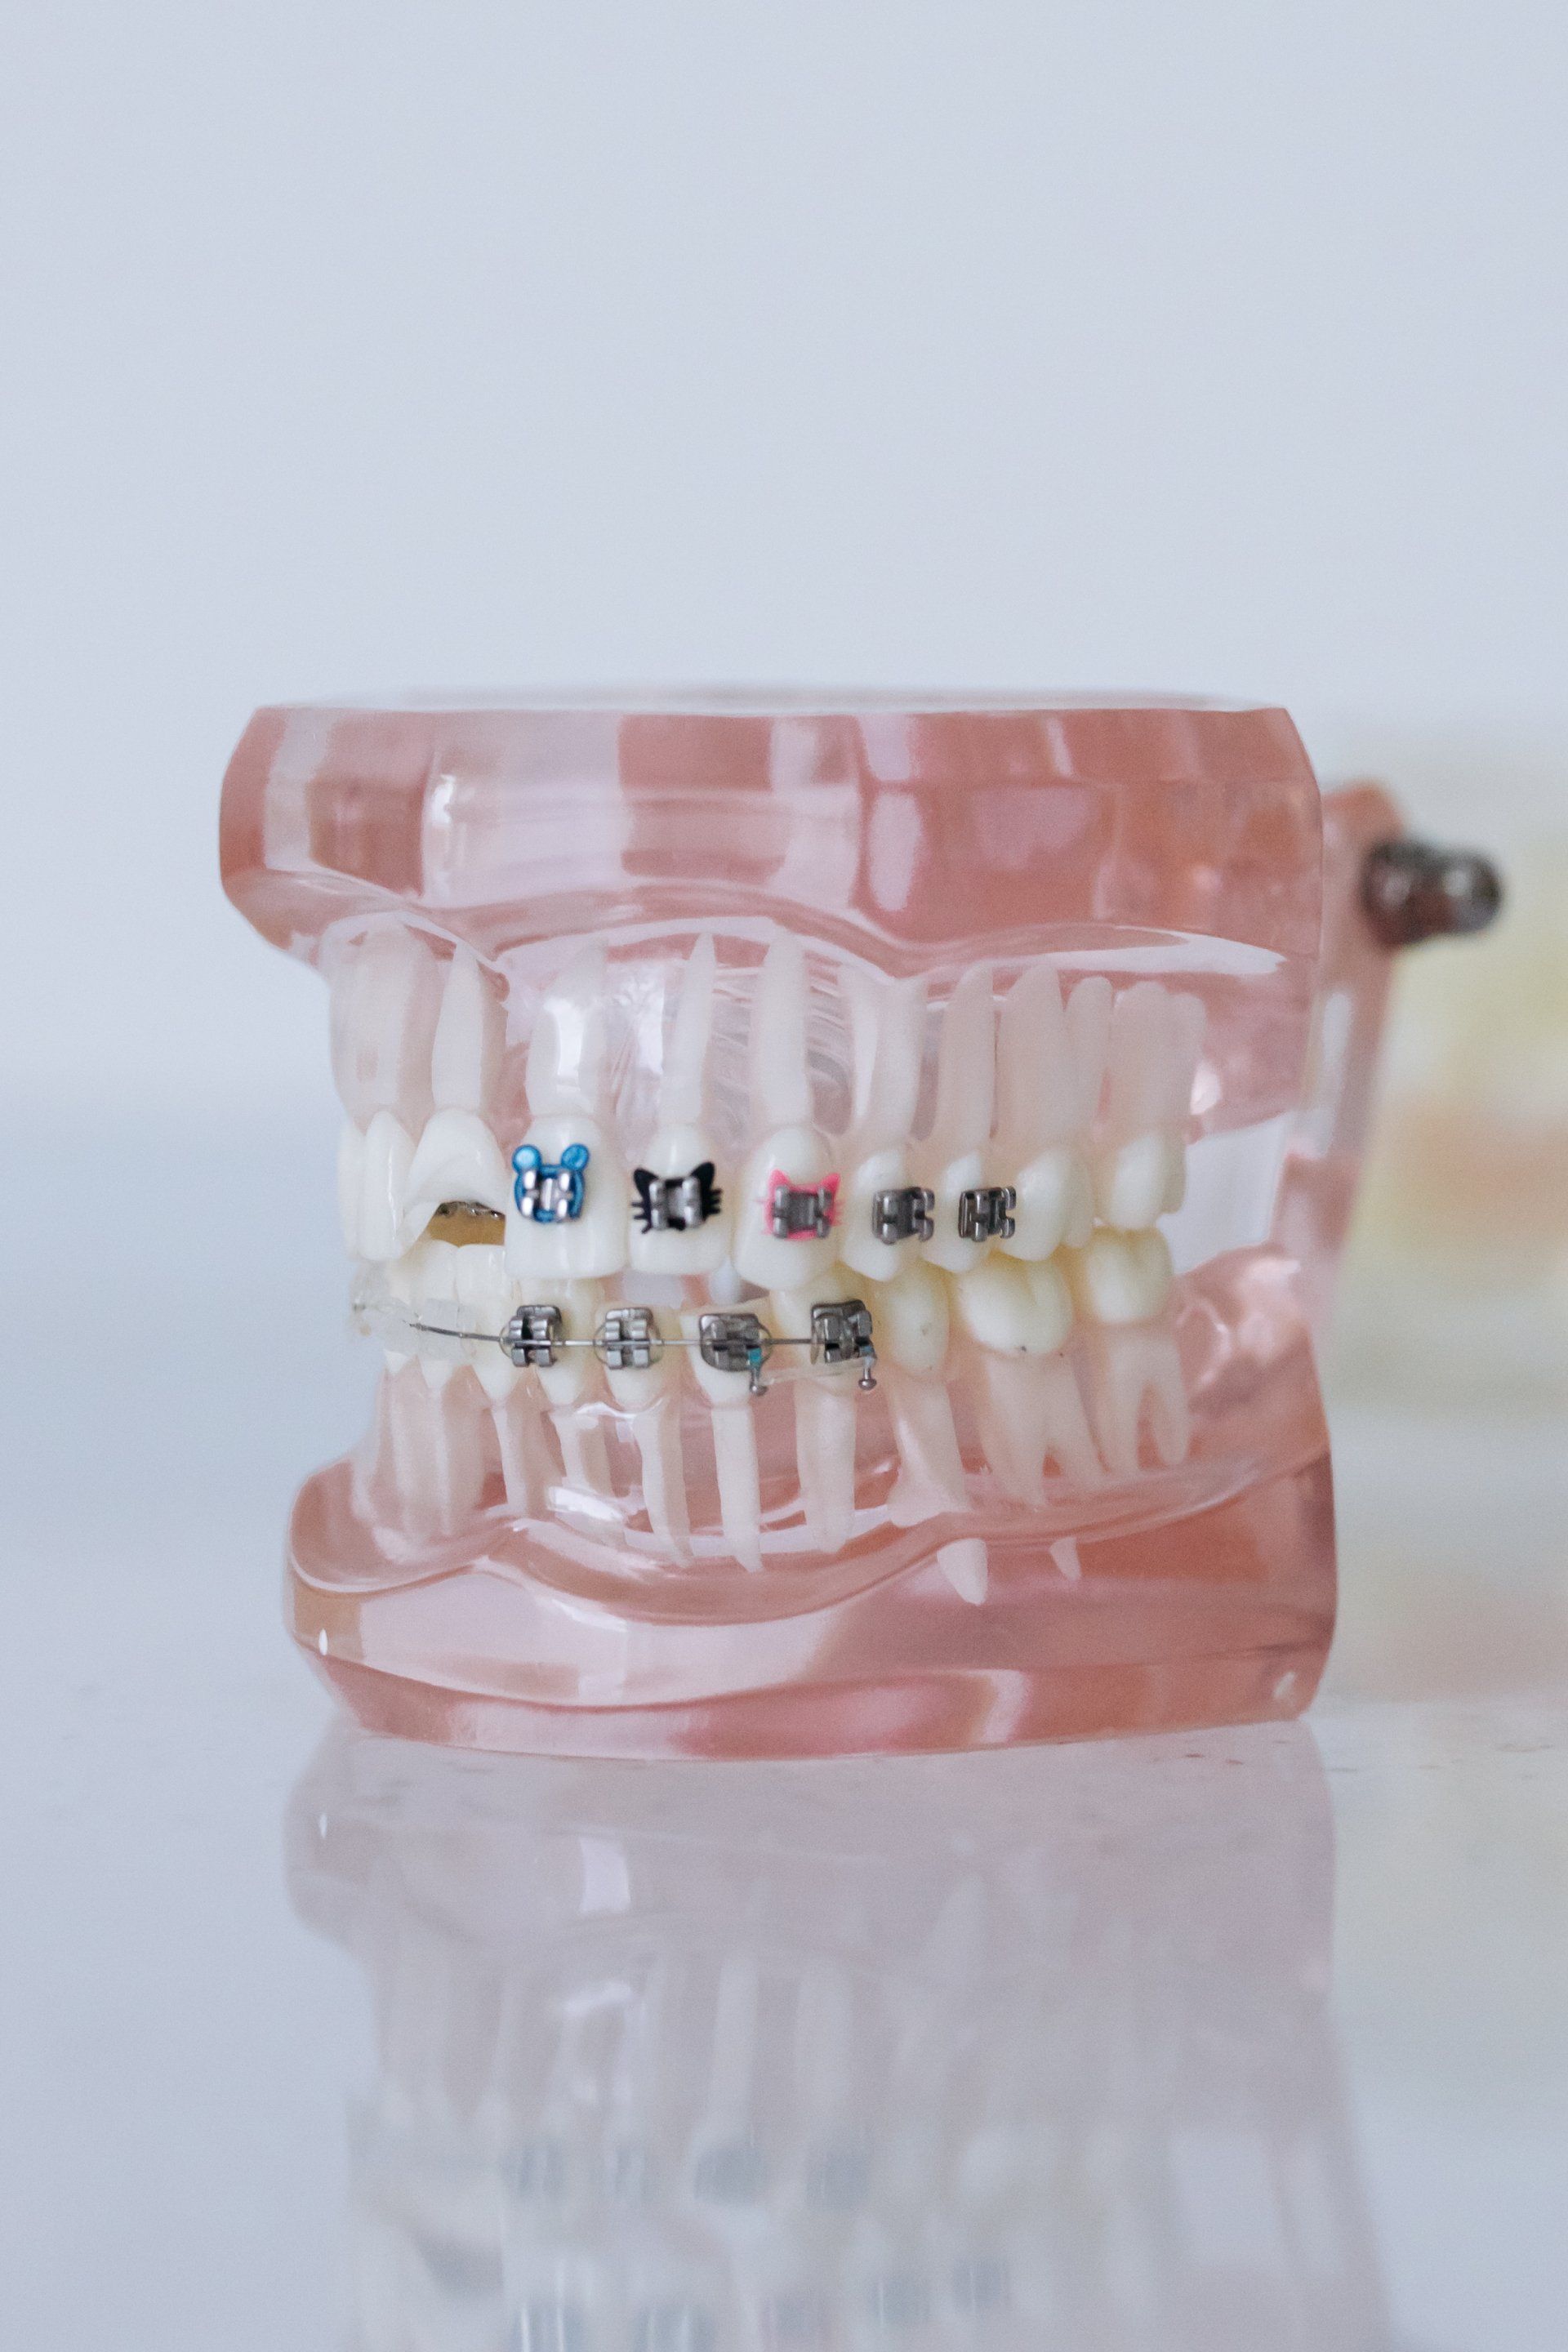 5 Things You Should Know About Braces: Traditional vs. Invisible